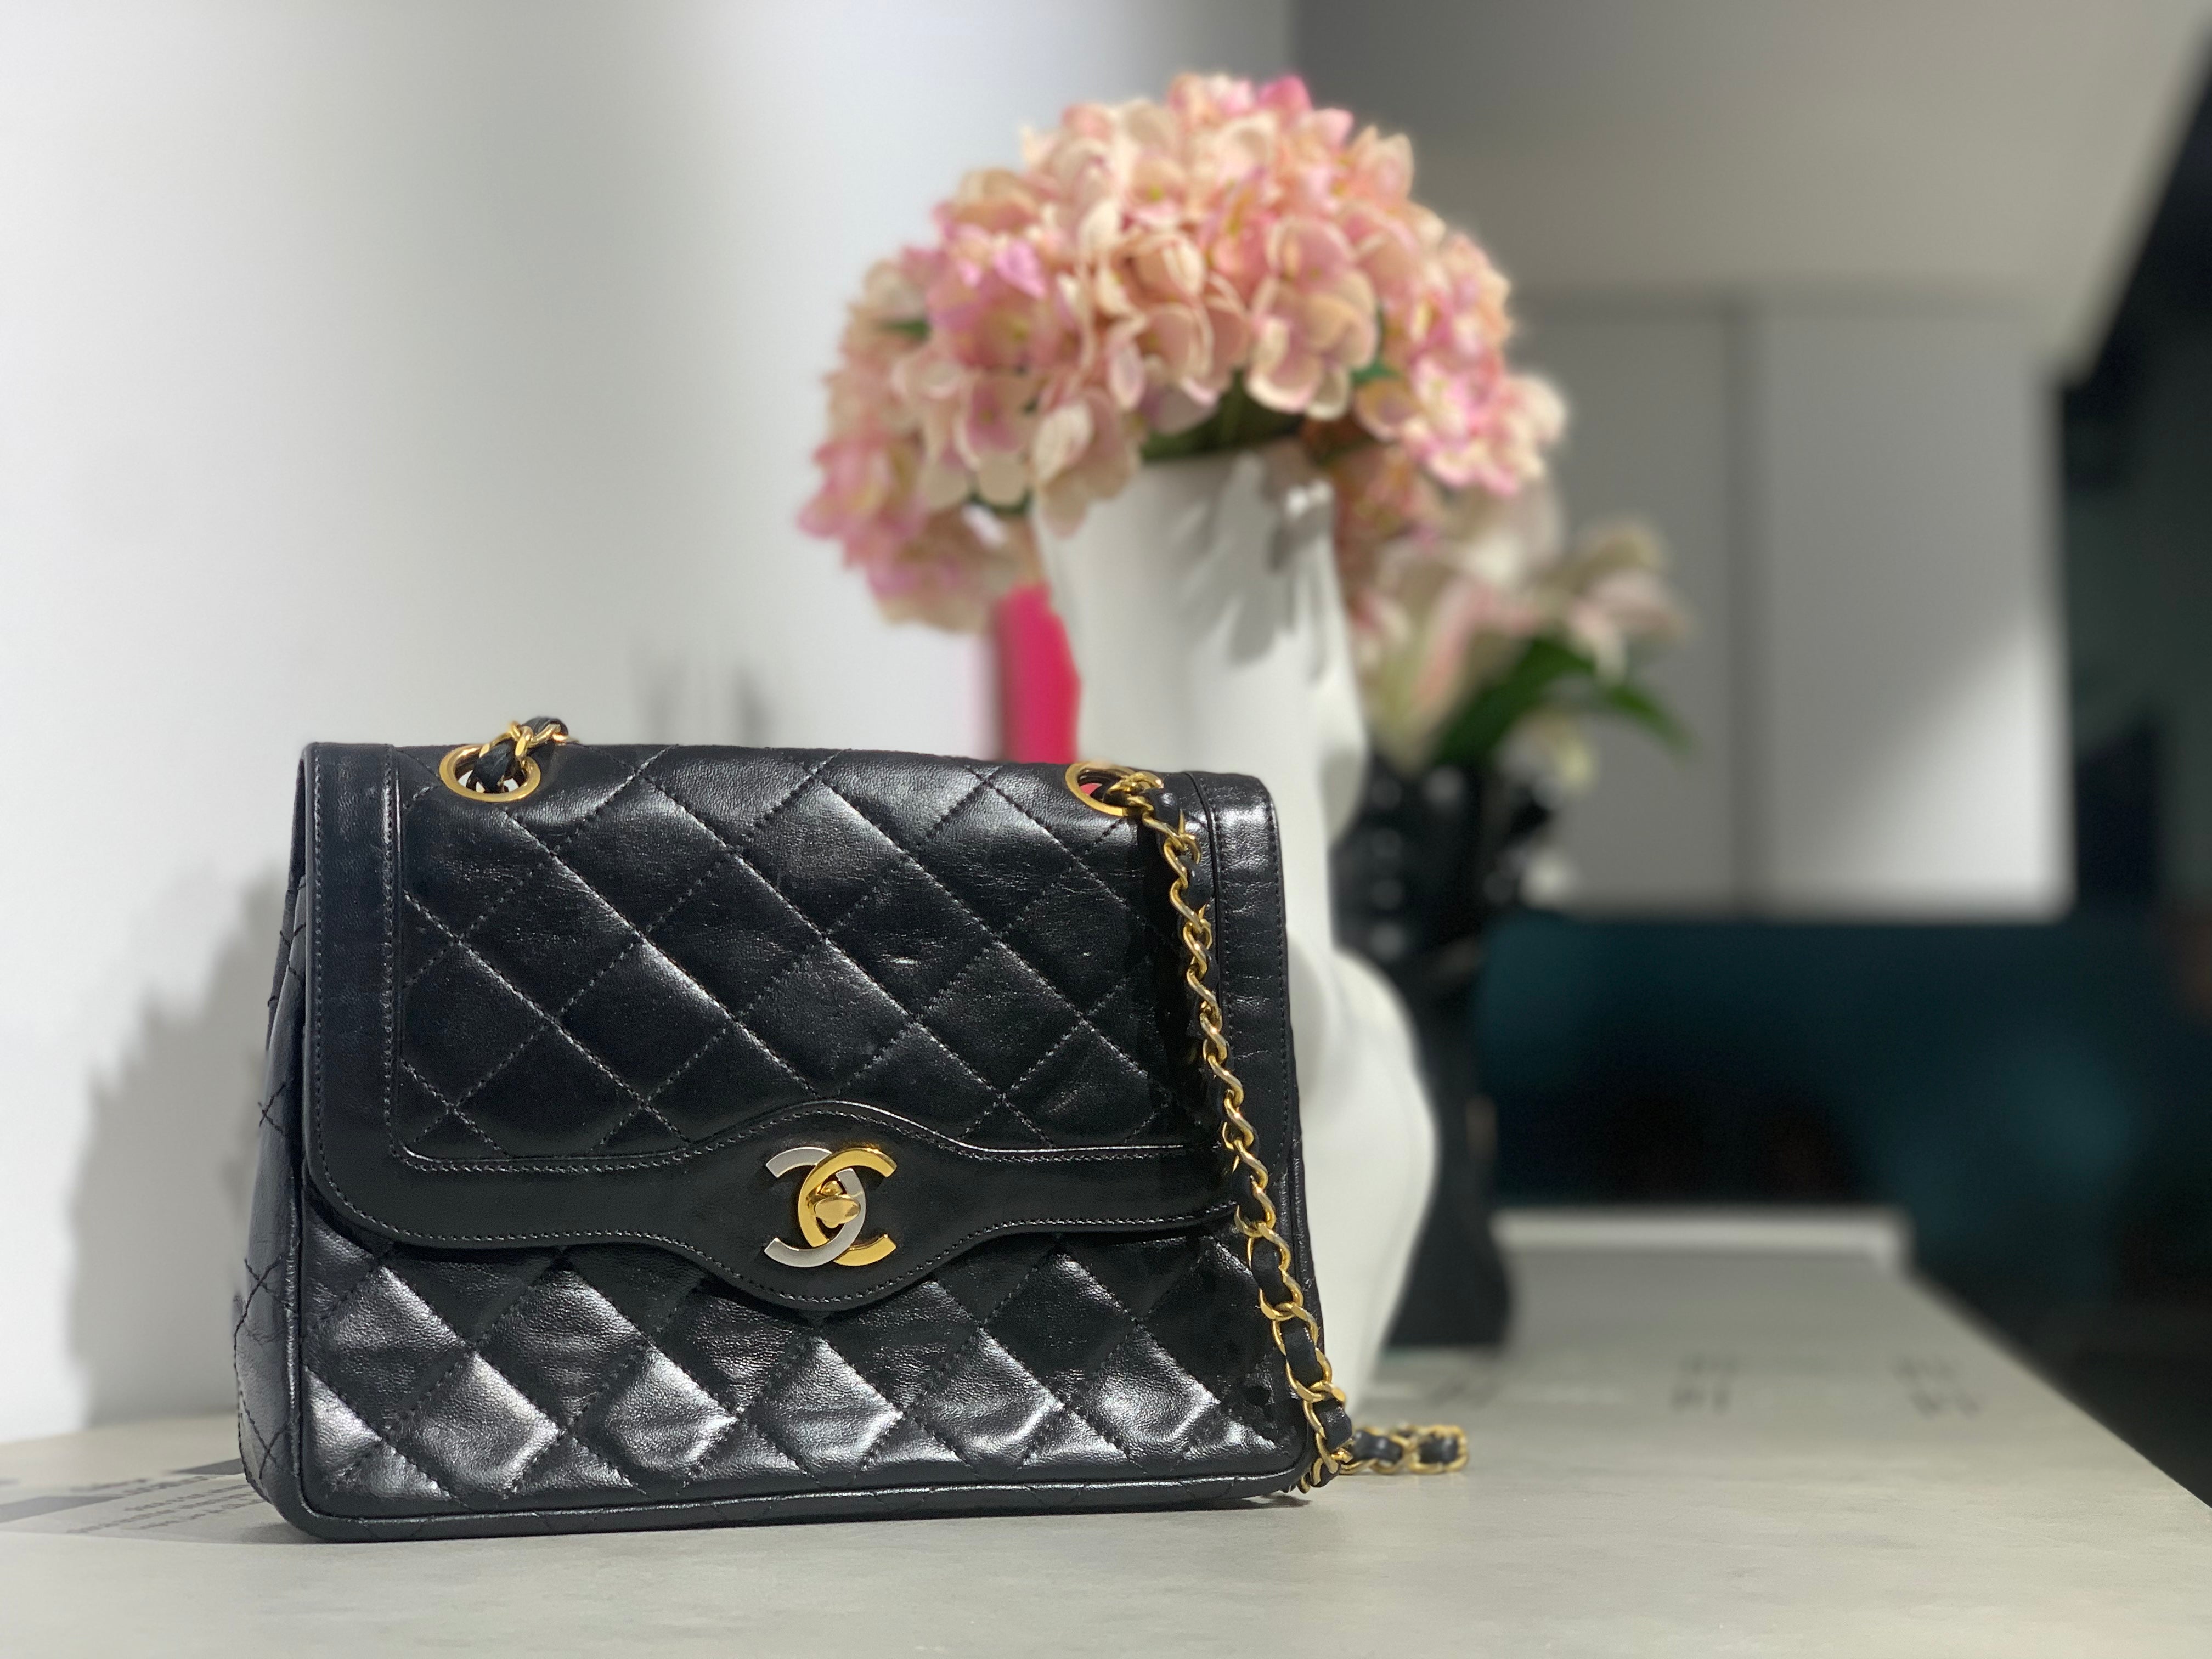 Chanel two-tone small flap bag